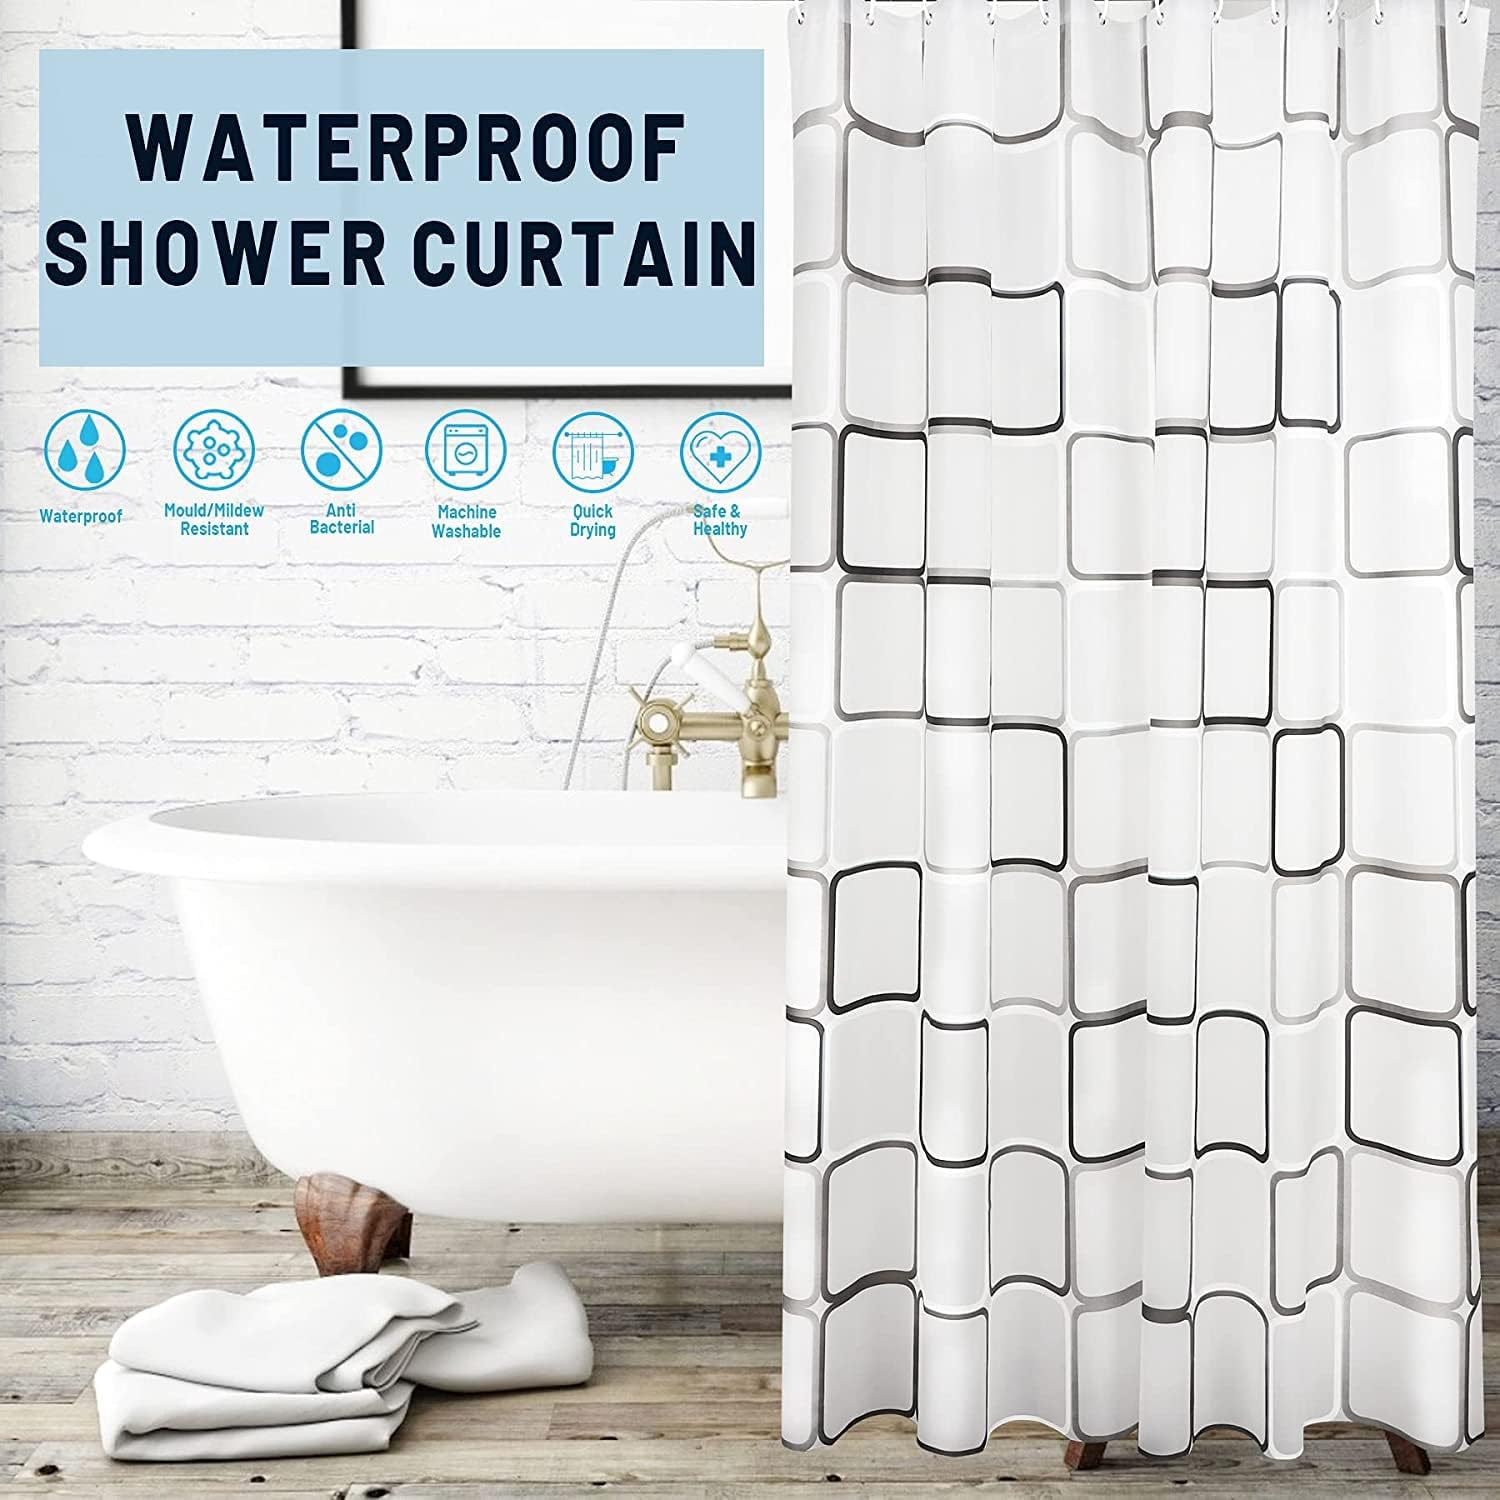 Waterproof Washable Quick-Drying Shower Curtain - Home Essentials Store